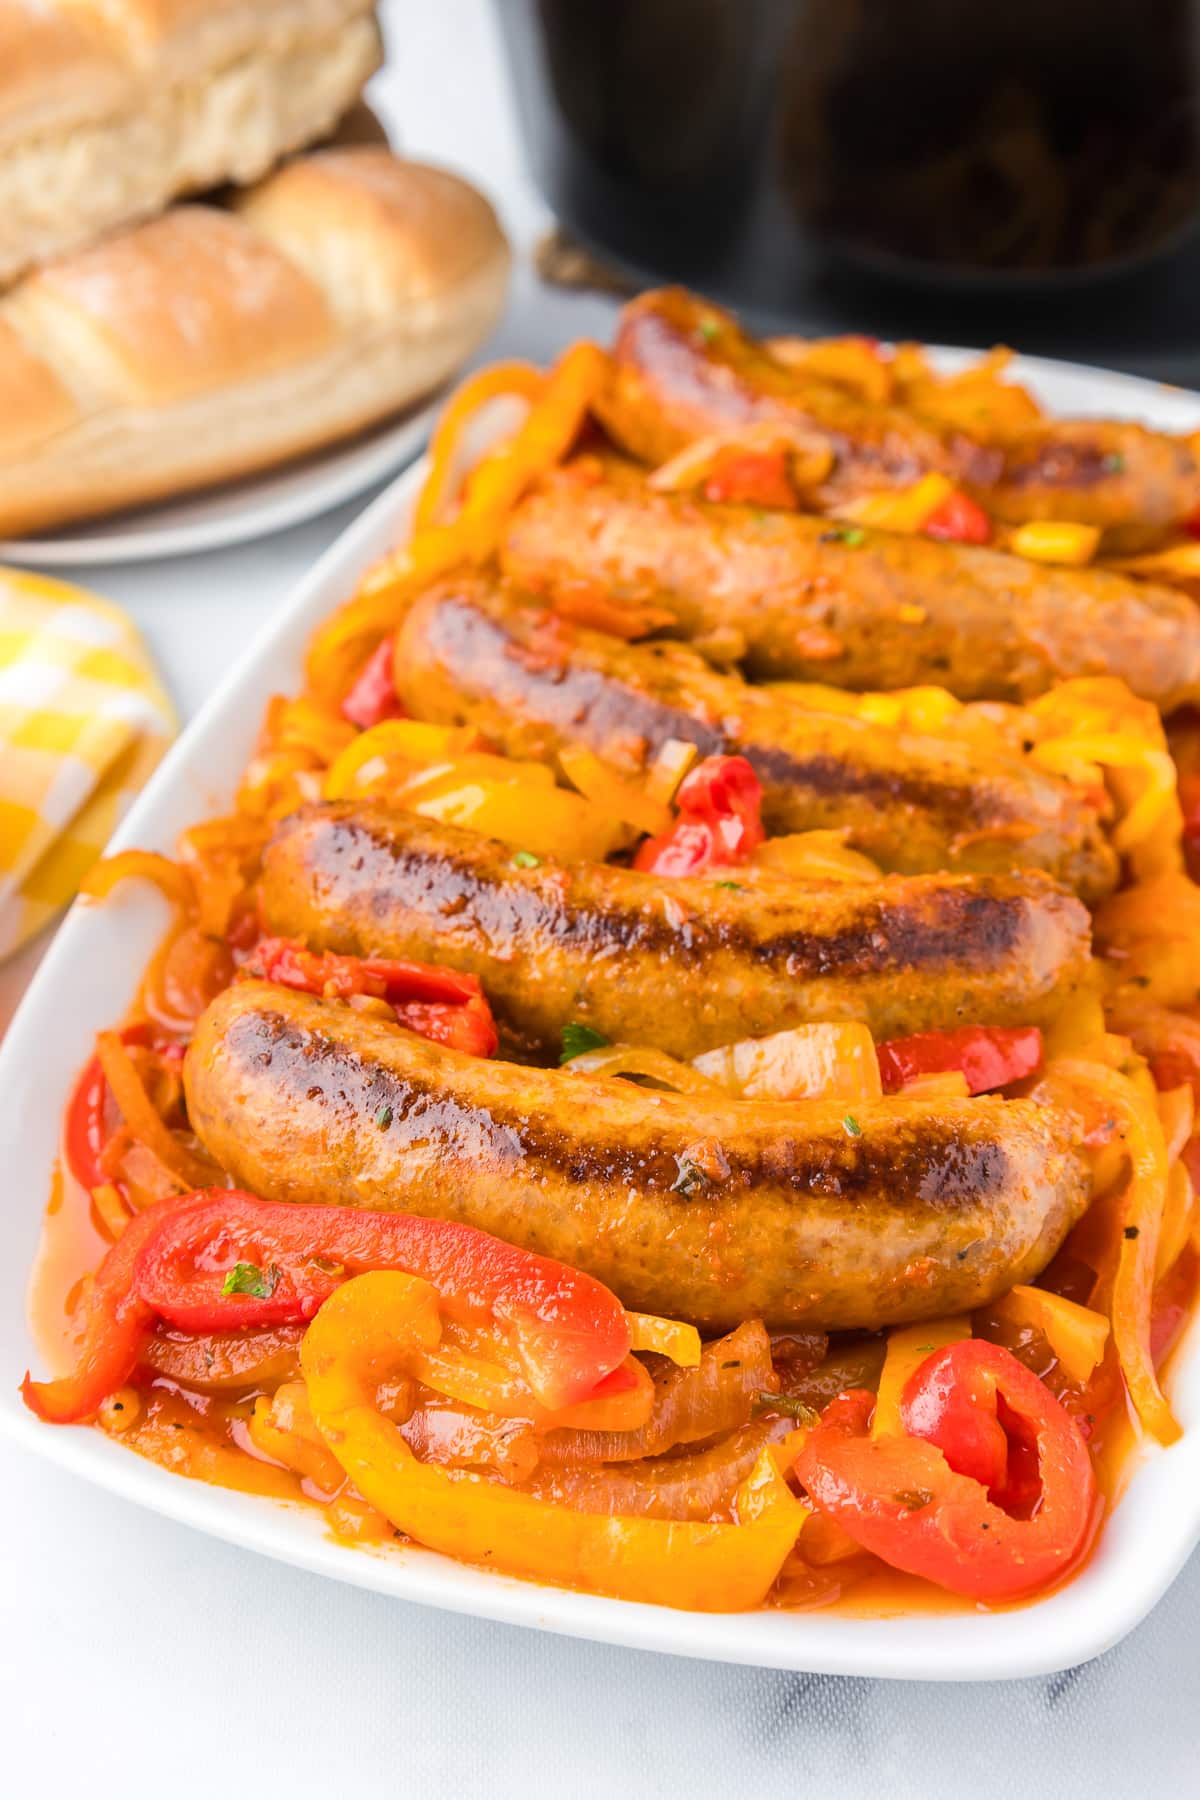 Sausages and peppers on a plate in front of a crock pot.